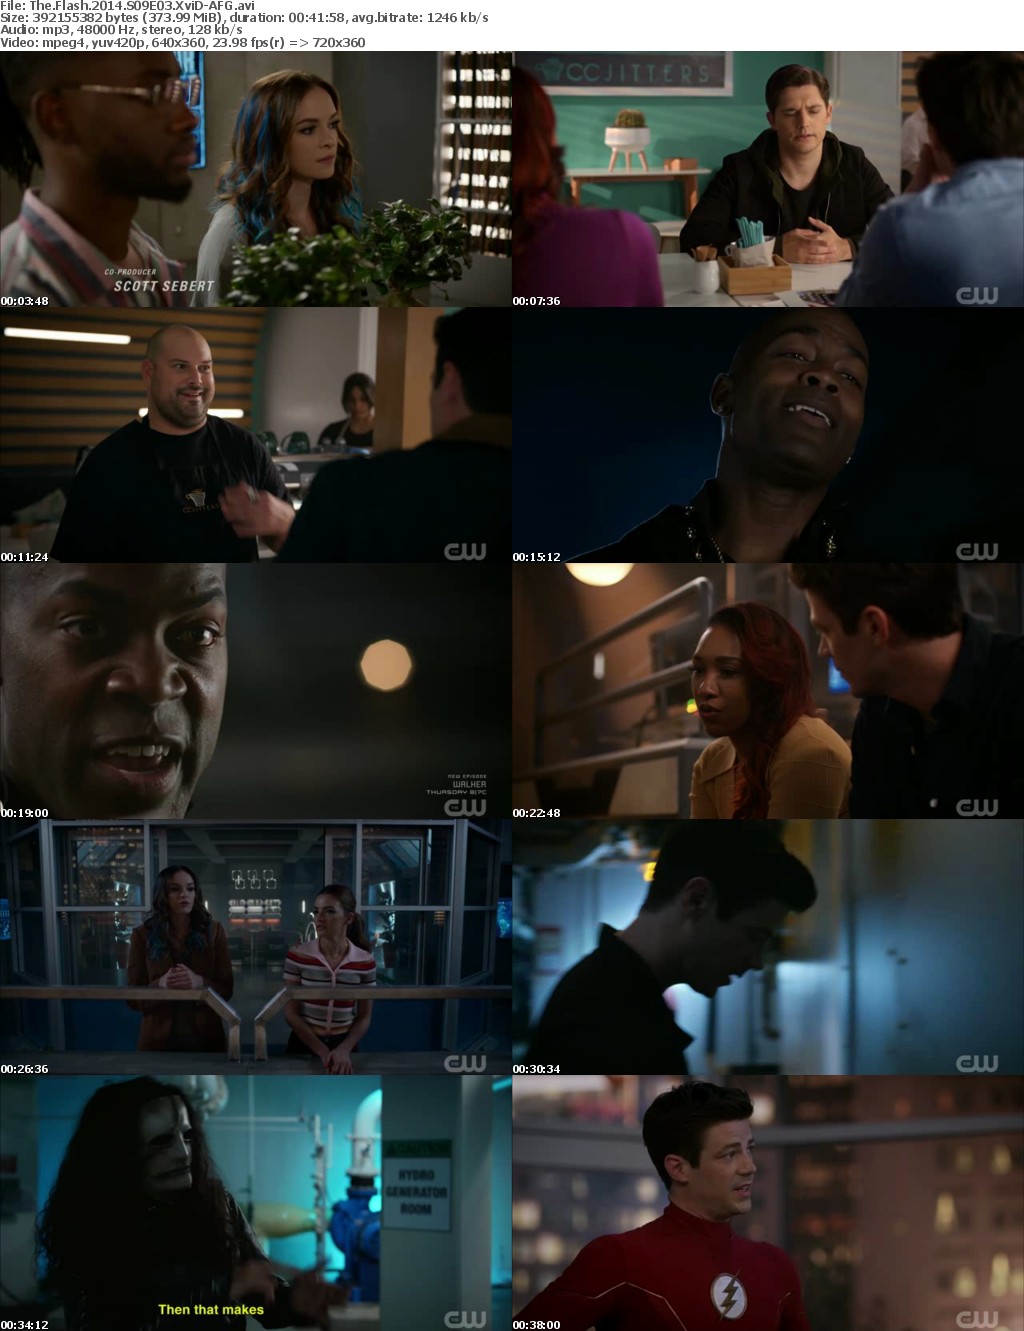 The Flash 2014 S09E03 XviD-AFG